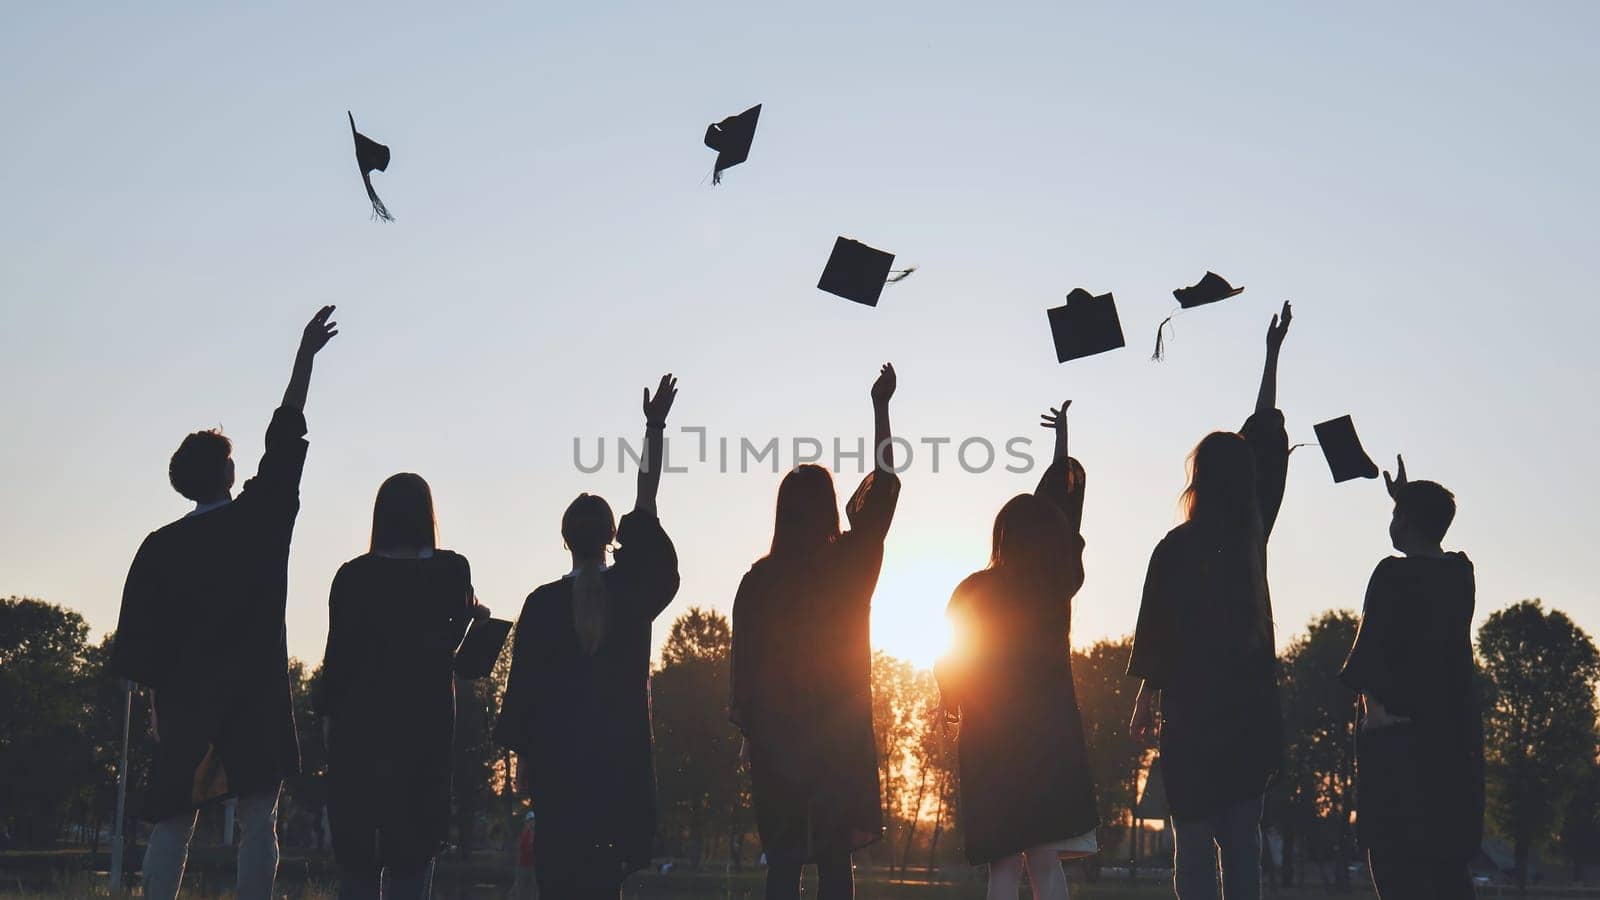 Silhouettes of Happy college graduates tossing their caps up at sunset